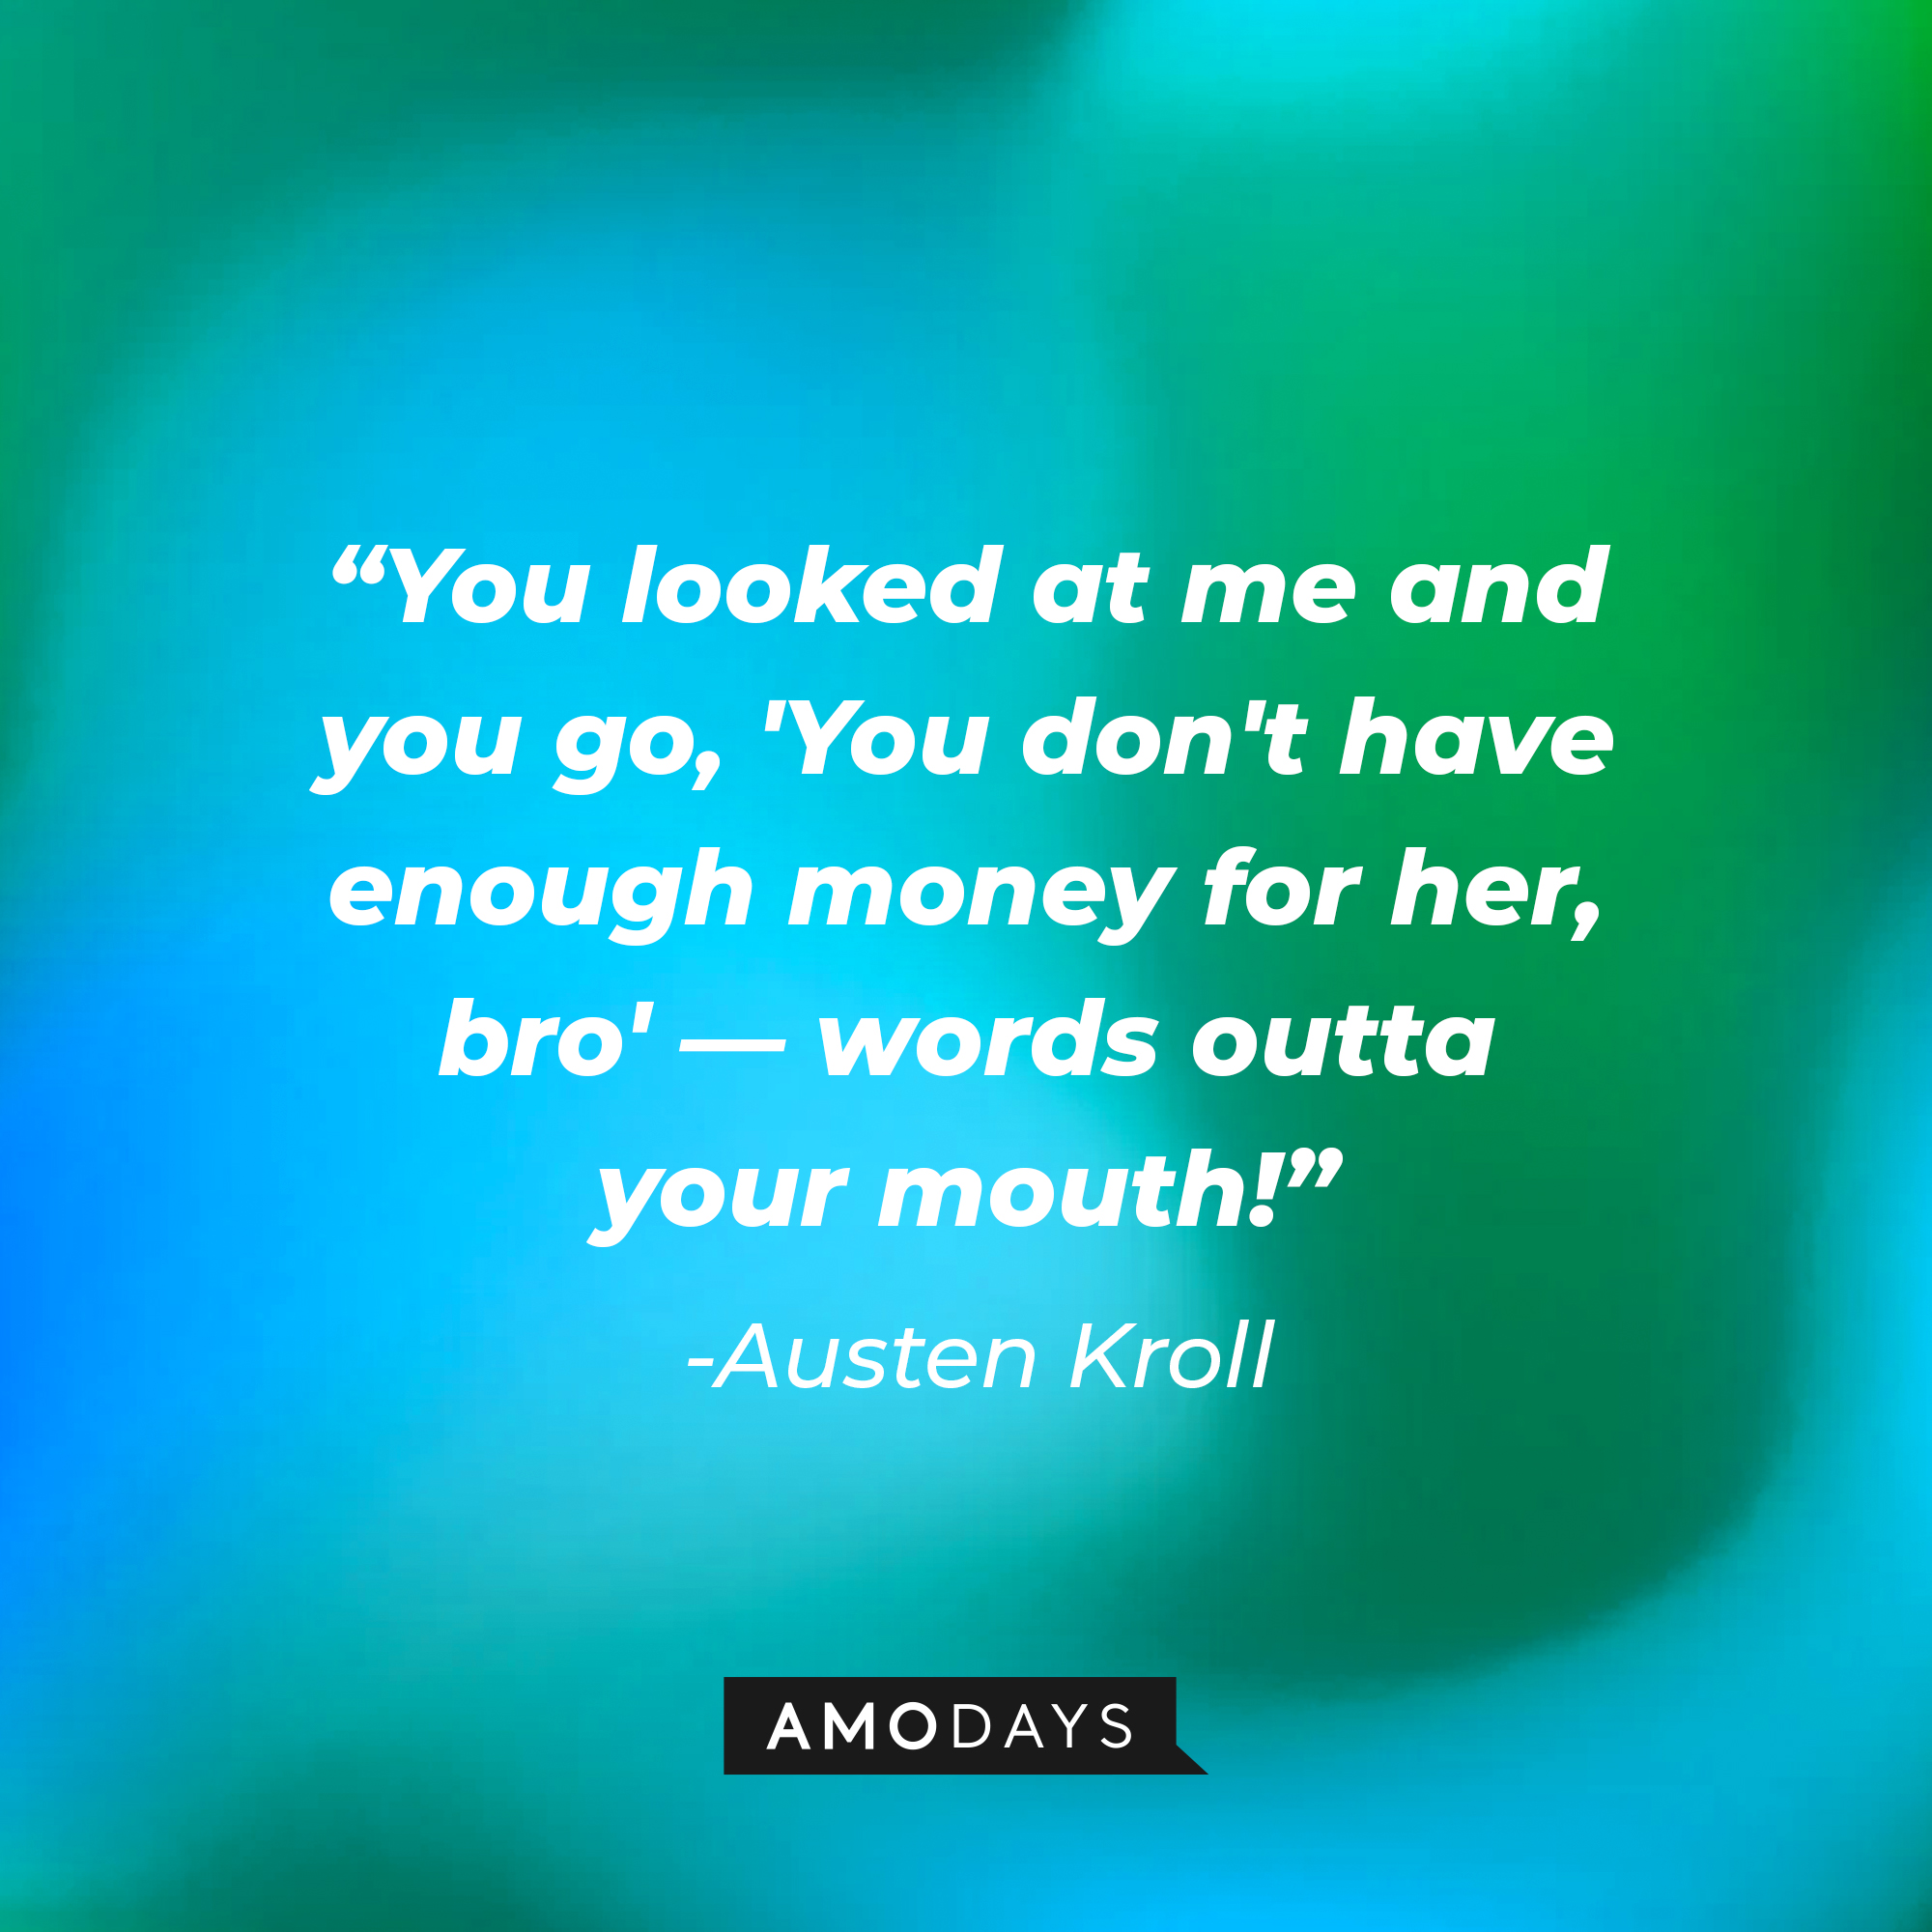 Austen Kroll's quote: "You looked at me and you go, 'You don't have enough money for her, bro' - words outta your mouth!" | Source: AmoDays